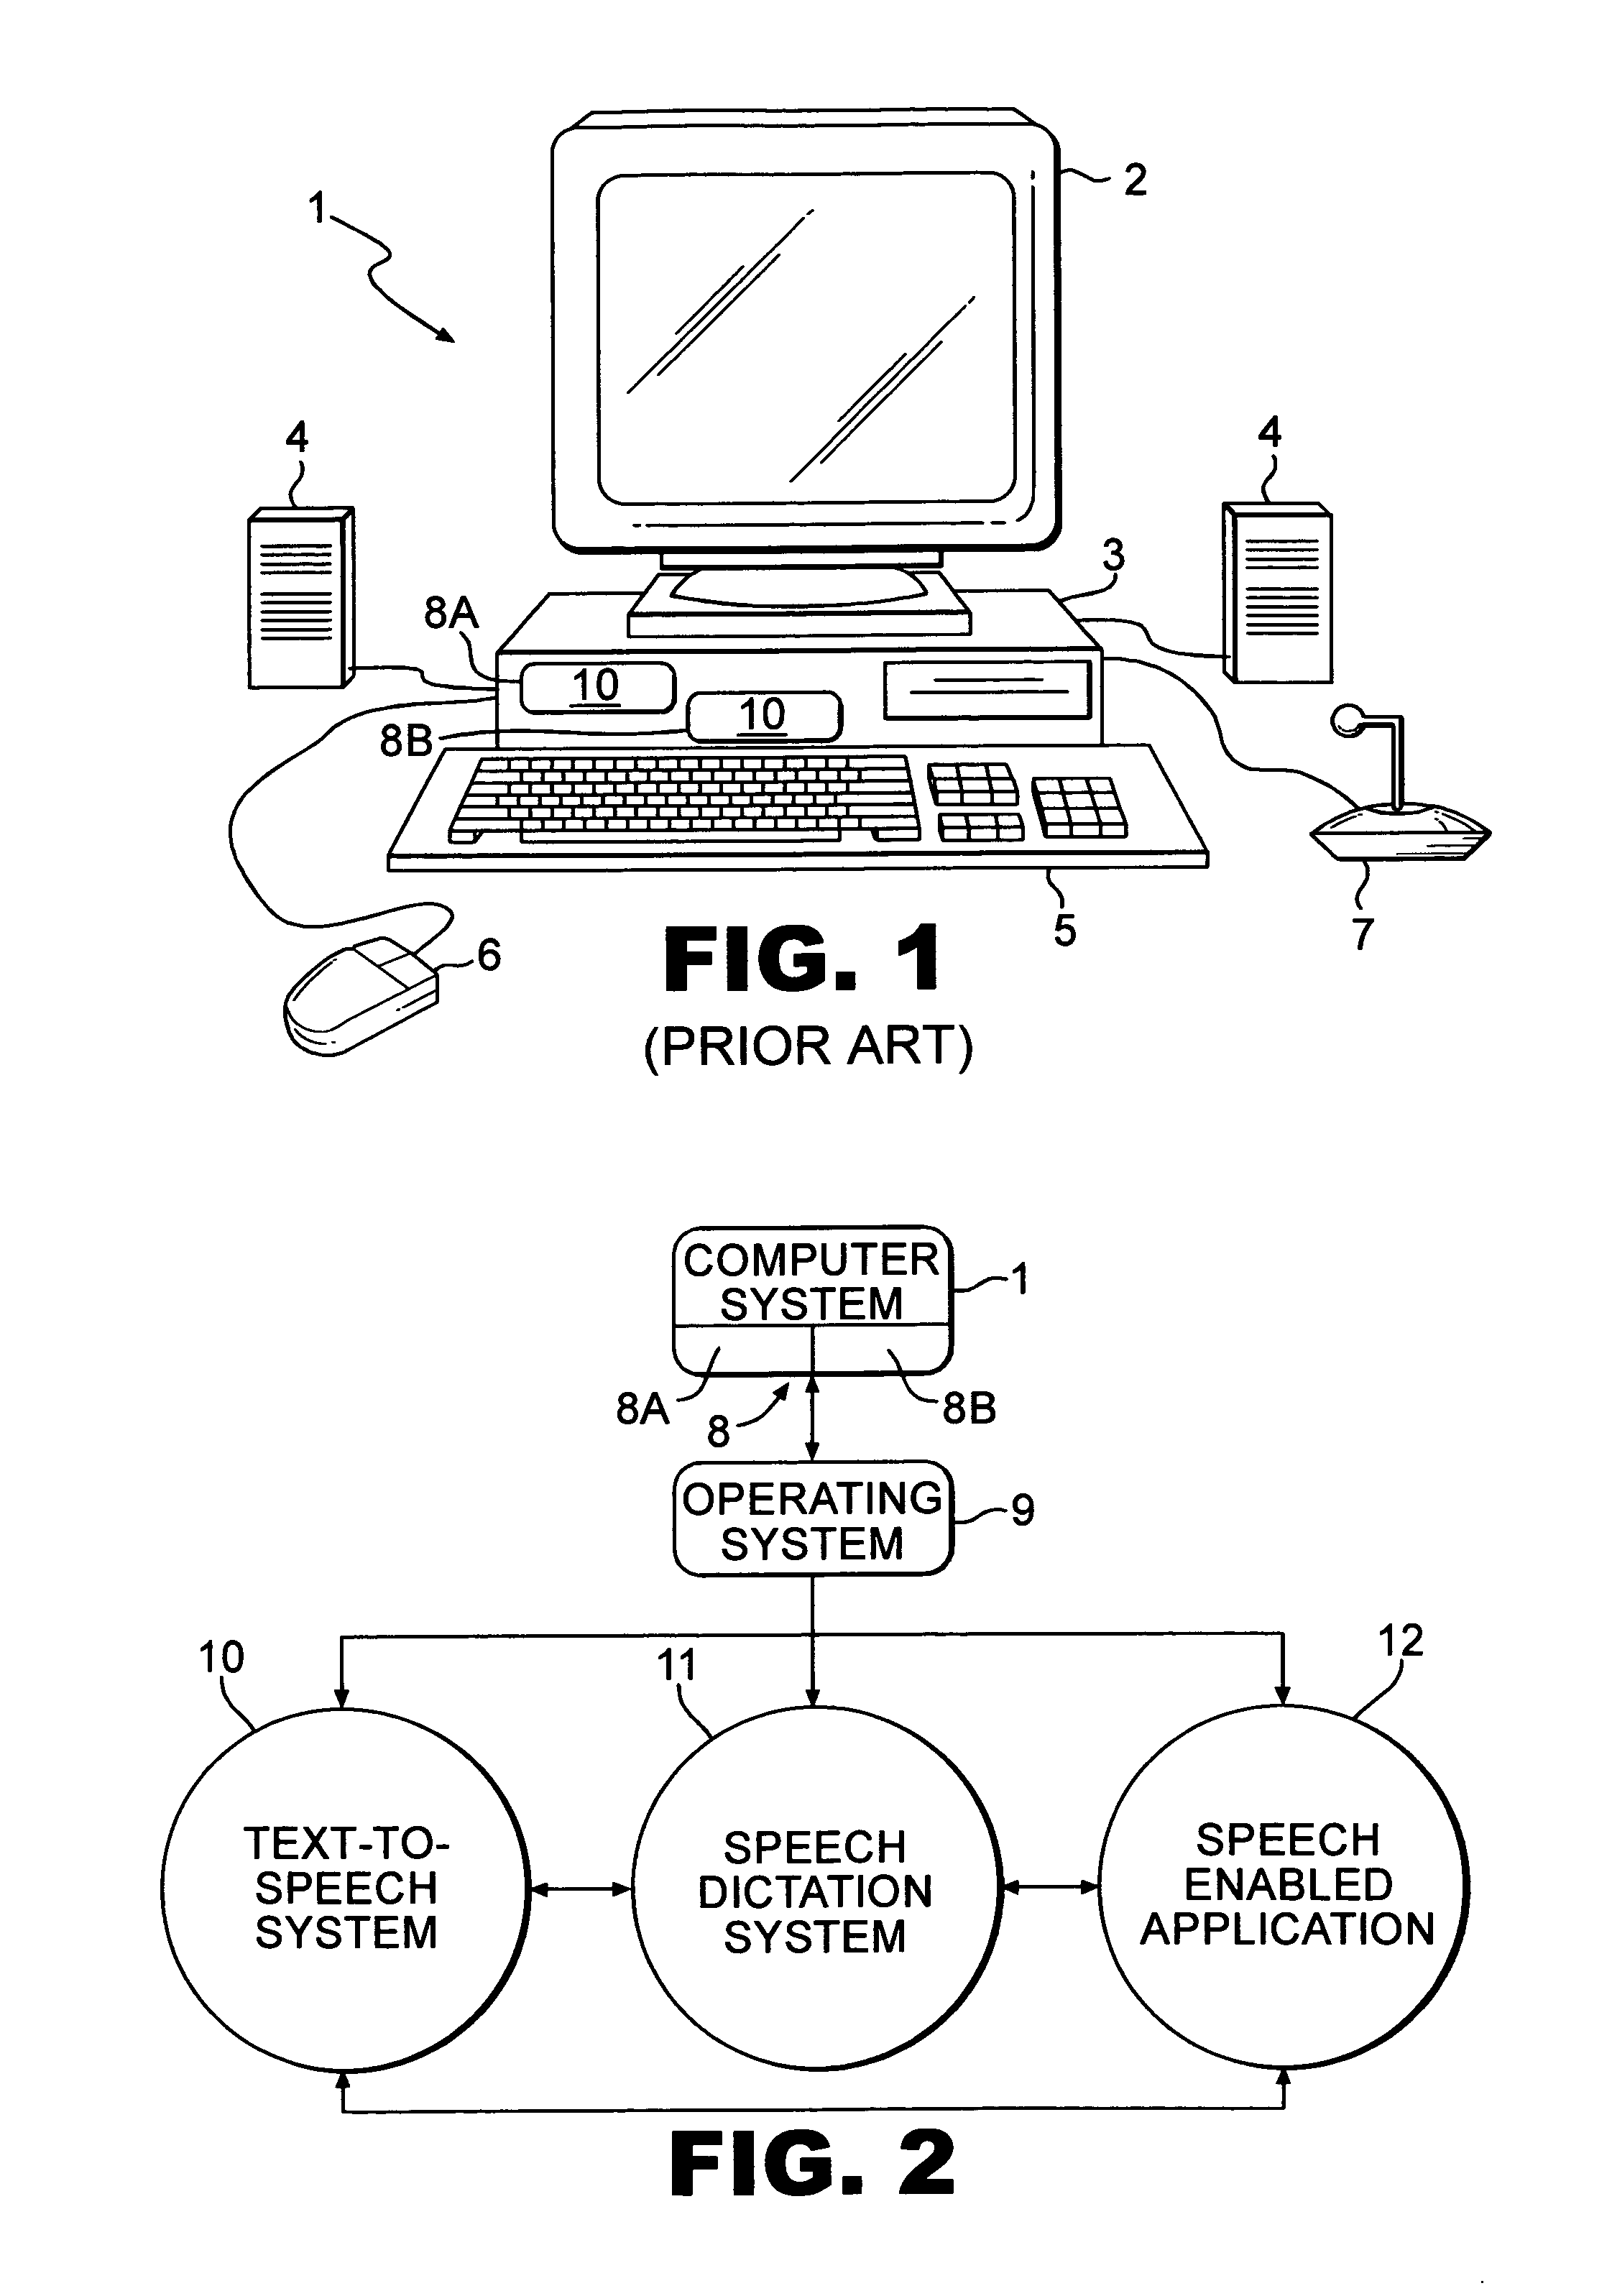 Method for guiding text-to-speech output timing using speech recognition markers